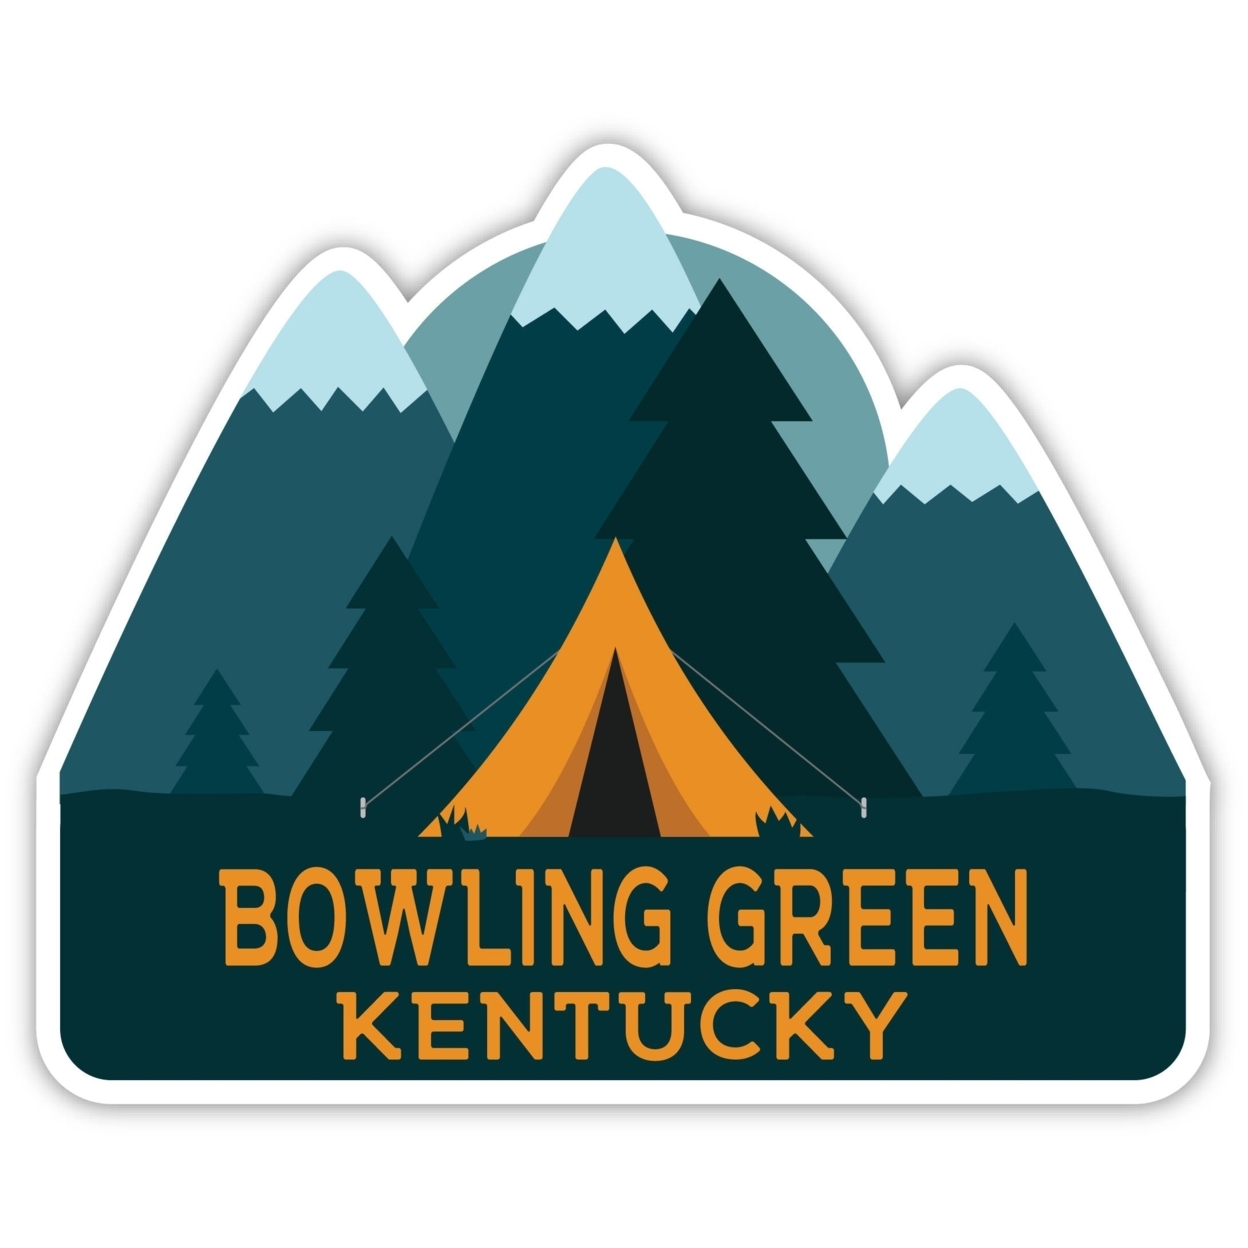 Bowling Green Kentucky Souvenir Decorative Stickers (Choose Theme And Size) - Single Unit, 12-Inch, Tent